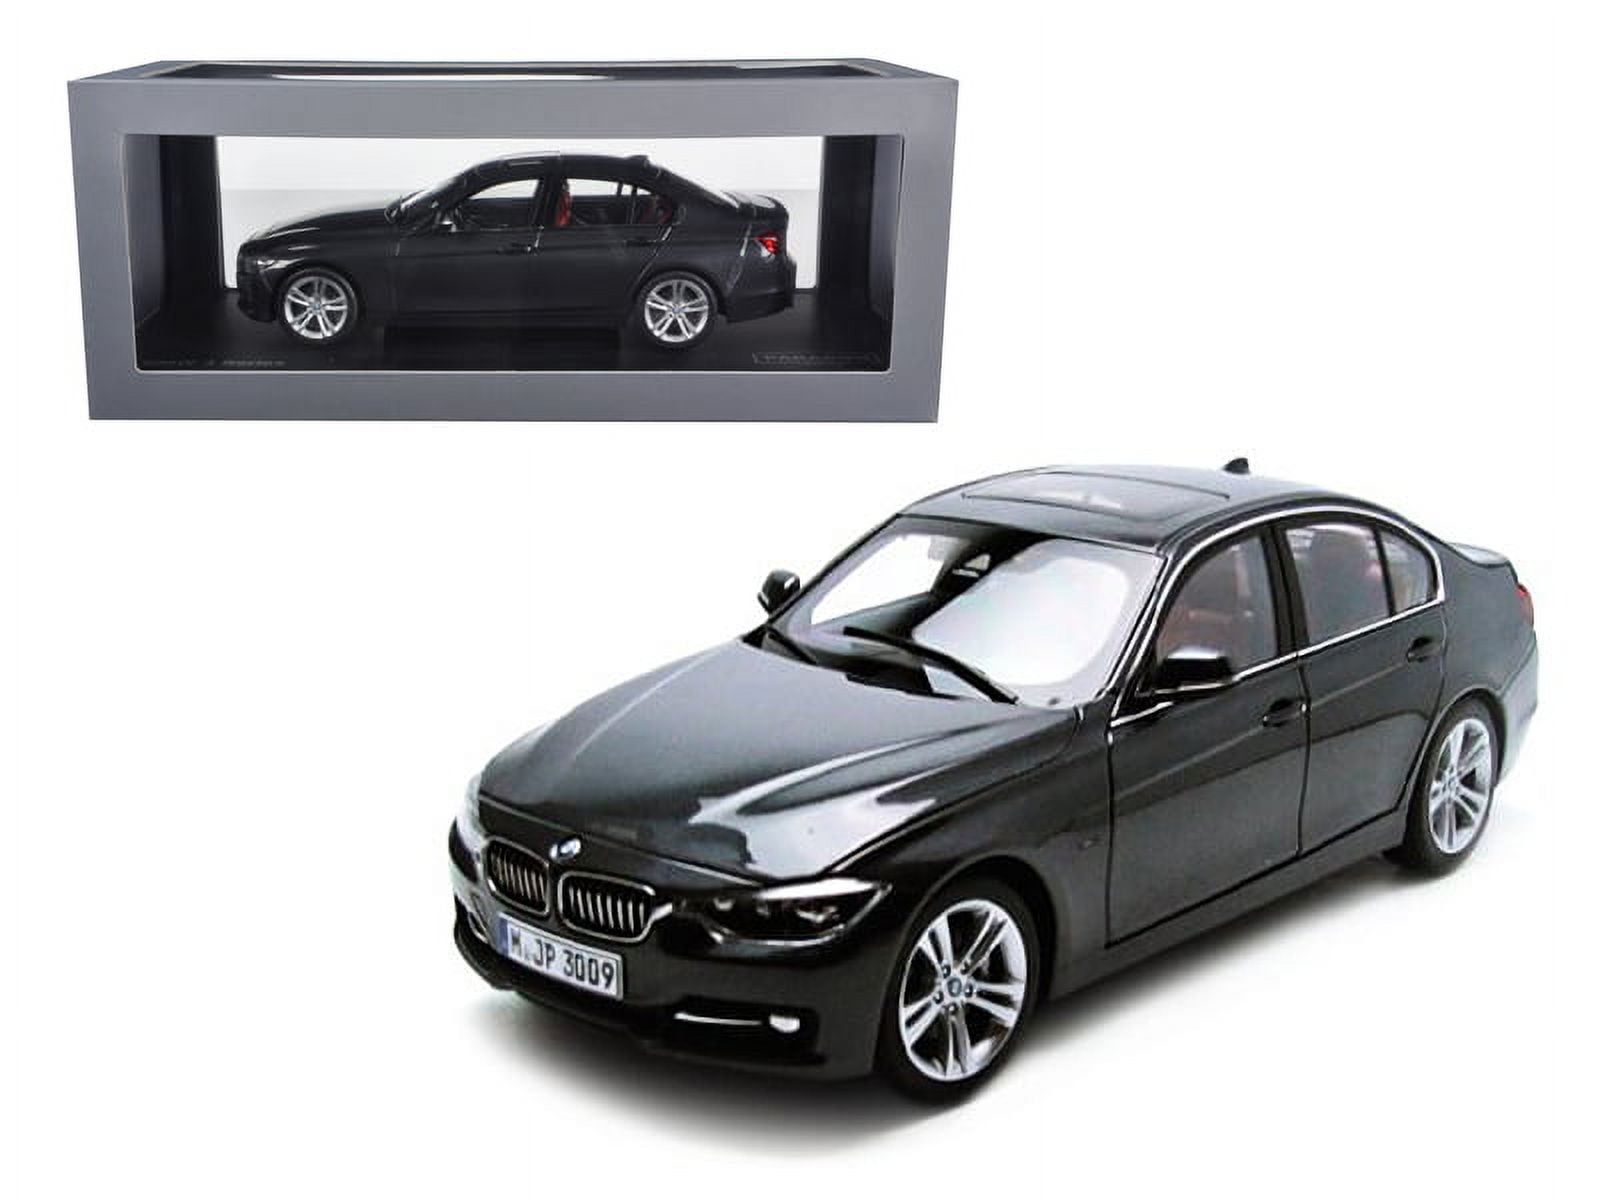 BMW Miniature - F30 dreams, in the palm of your hand. Order Here